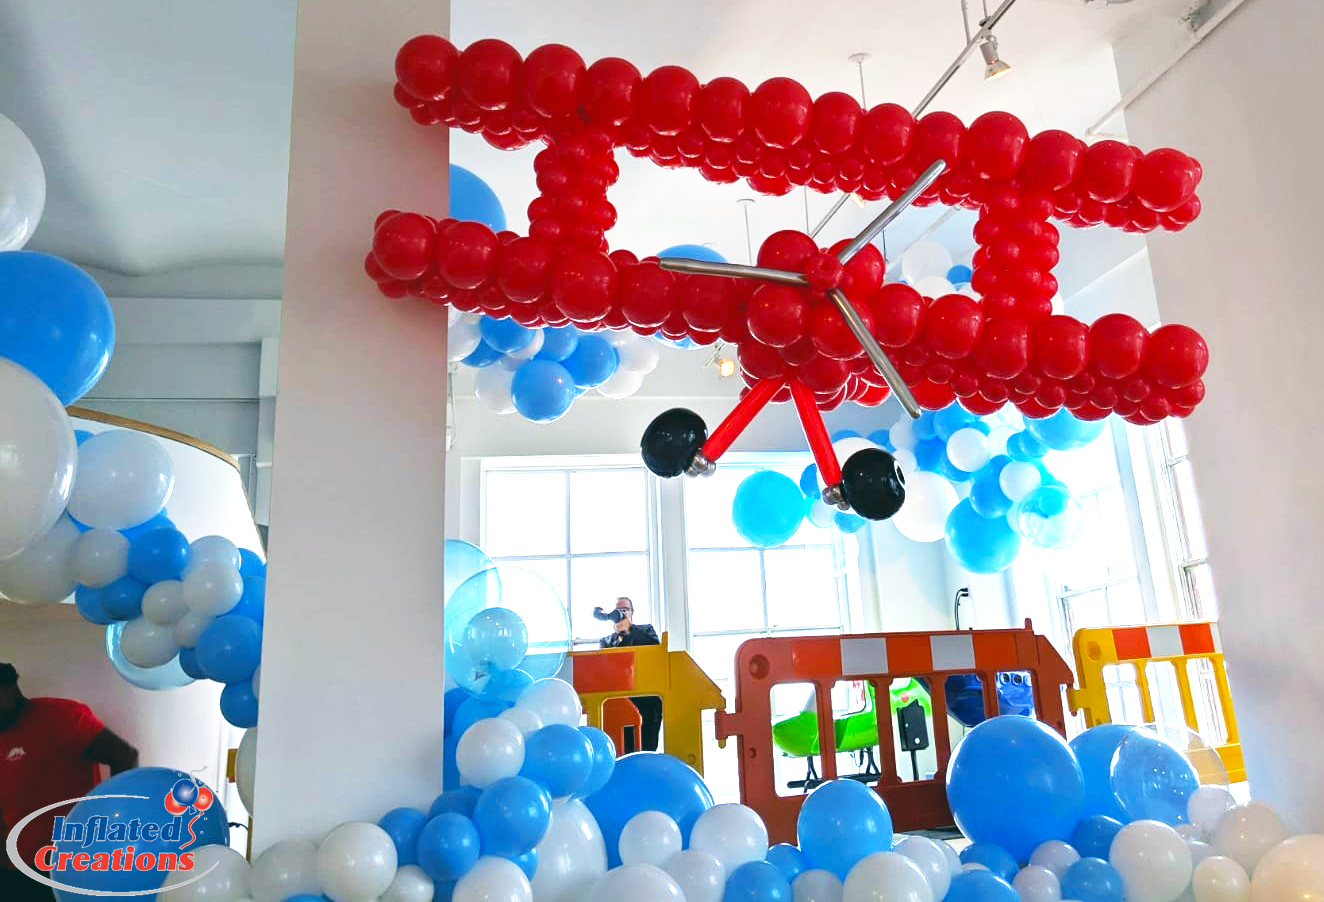   Inflated Creations   Ideas that Fly!   Learn More  